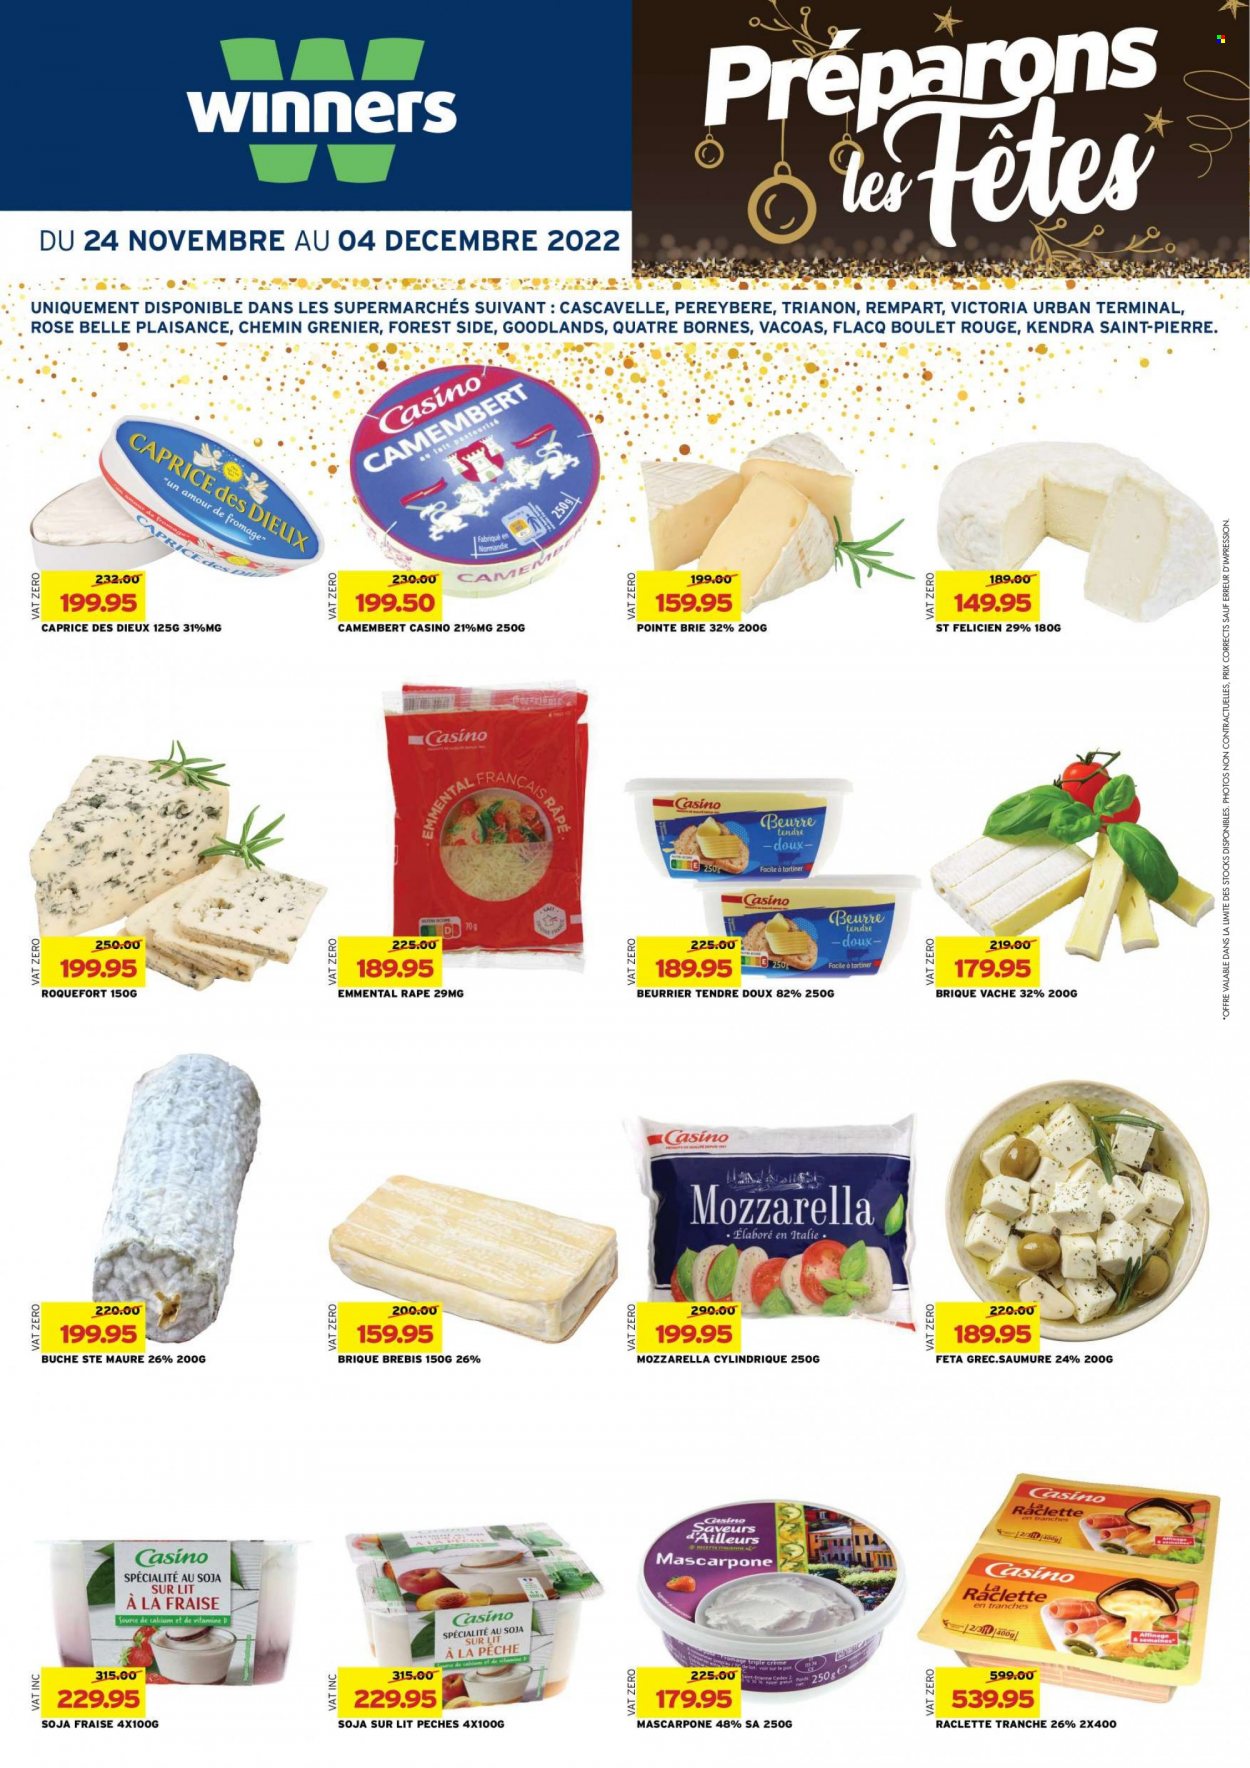 Winner's Catalogue - 24.11.2022 - 4.12.2022 - Sales products - raclette cheese, brie cheese, feta cheese, Victoria, wine, rosé wine, calcium, camembert, mascarpone, mozzarella. Page 8.